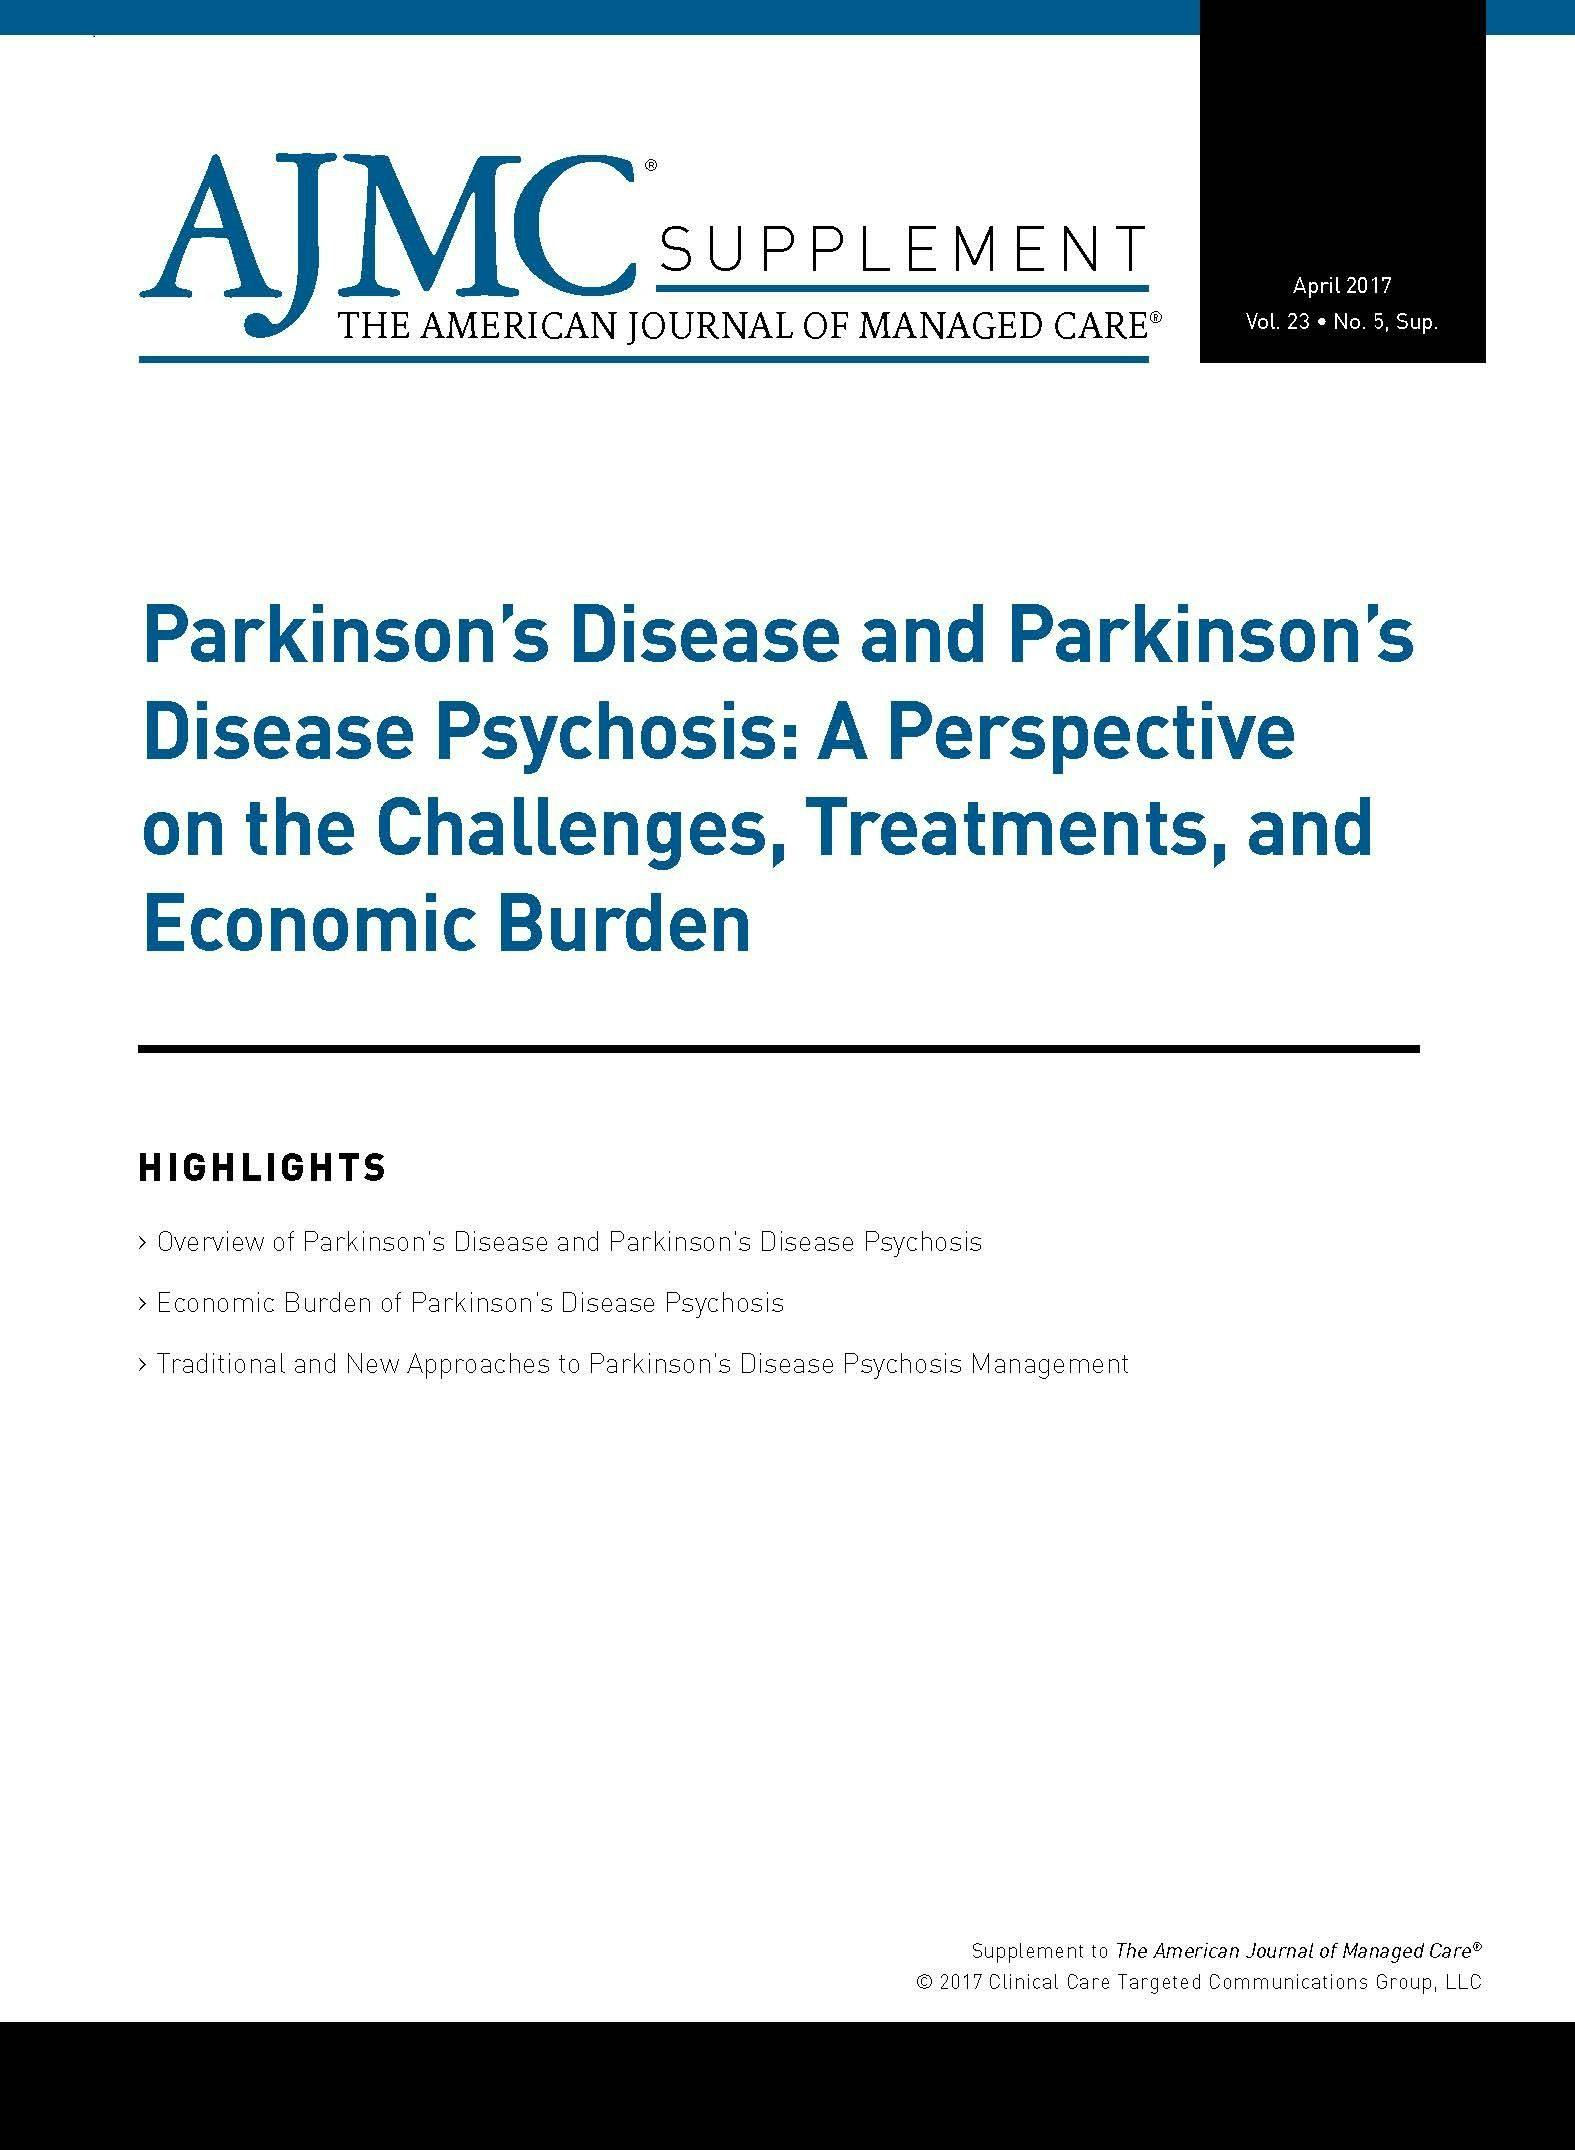 Parkinson's Disease and Parkinson's Disease Psychosis: A Perspective on the Challenges, Treatments and Economic Burden